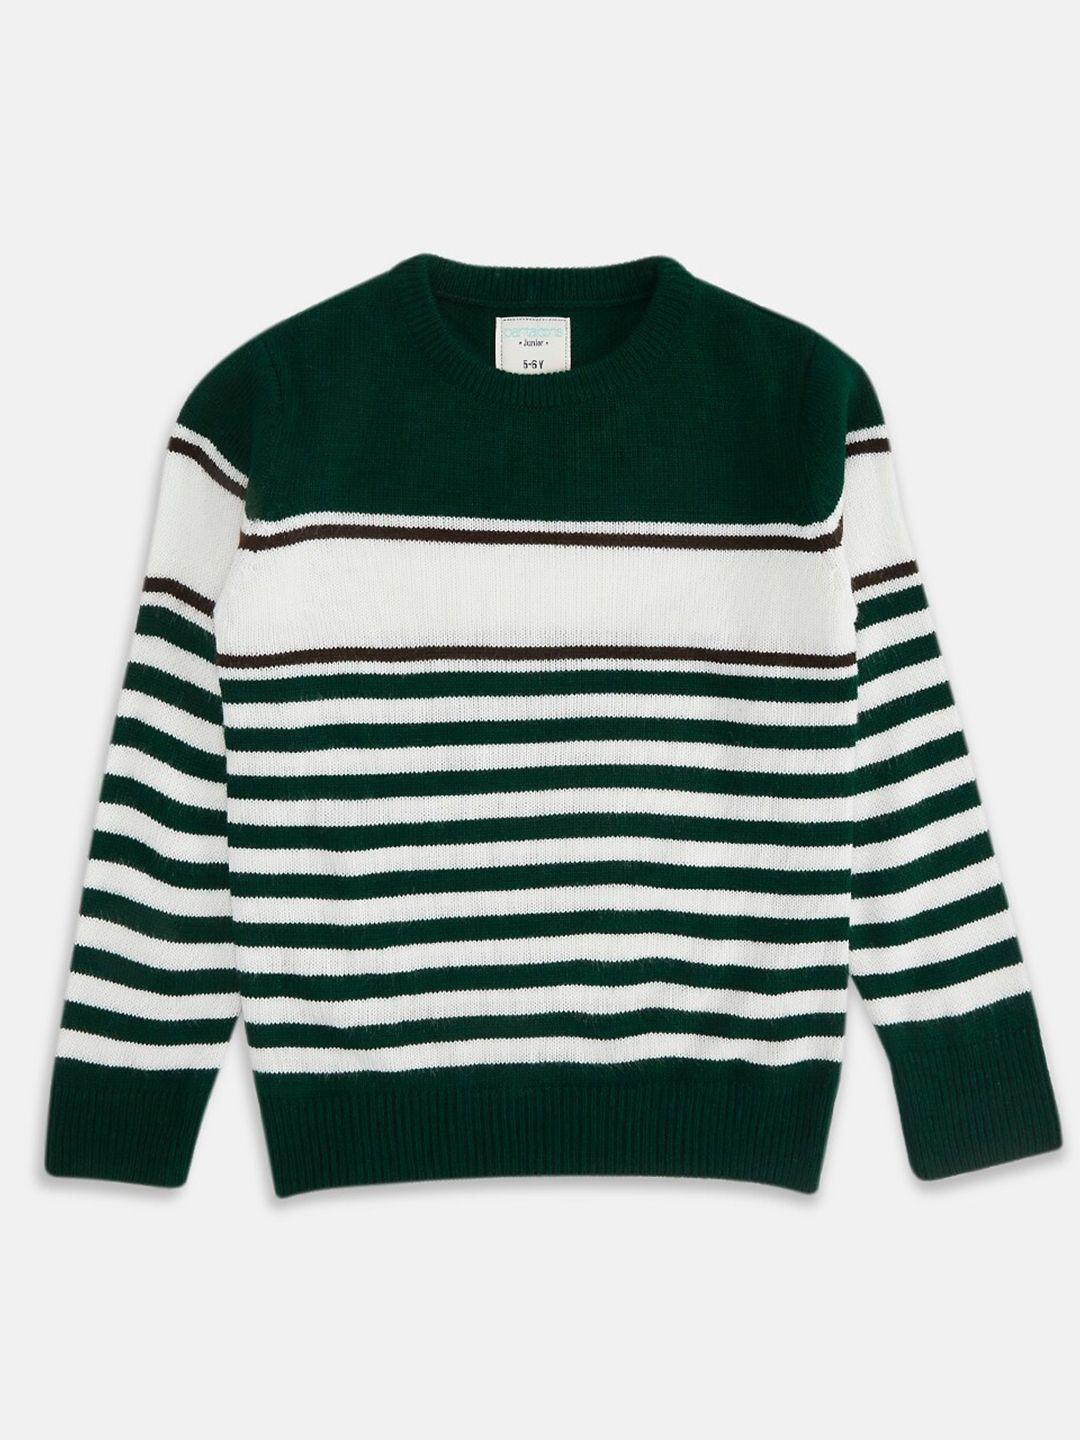 pantaloons junior boys olive green & white striped pullover